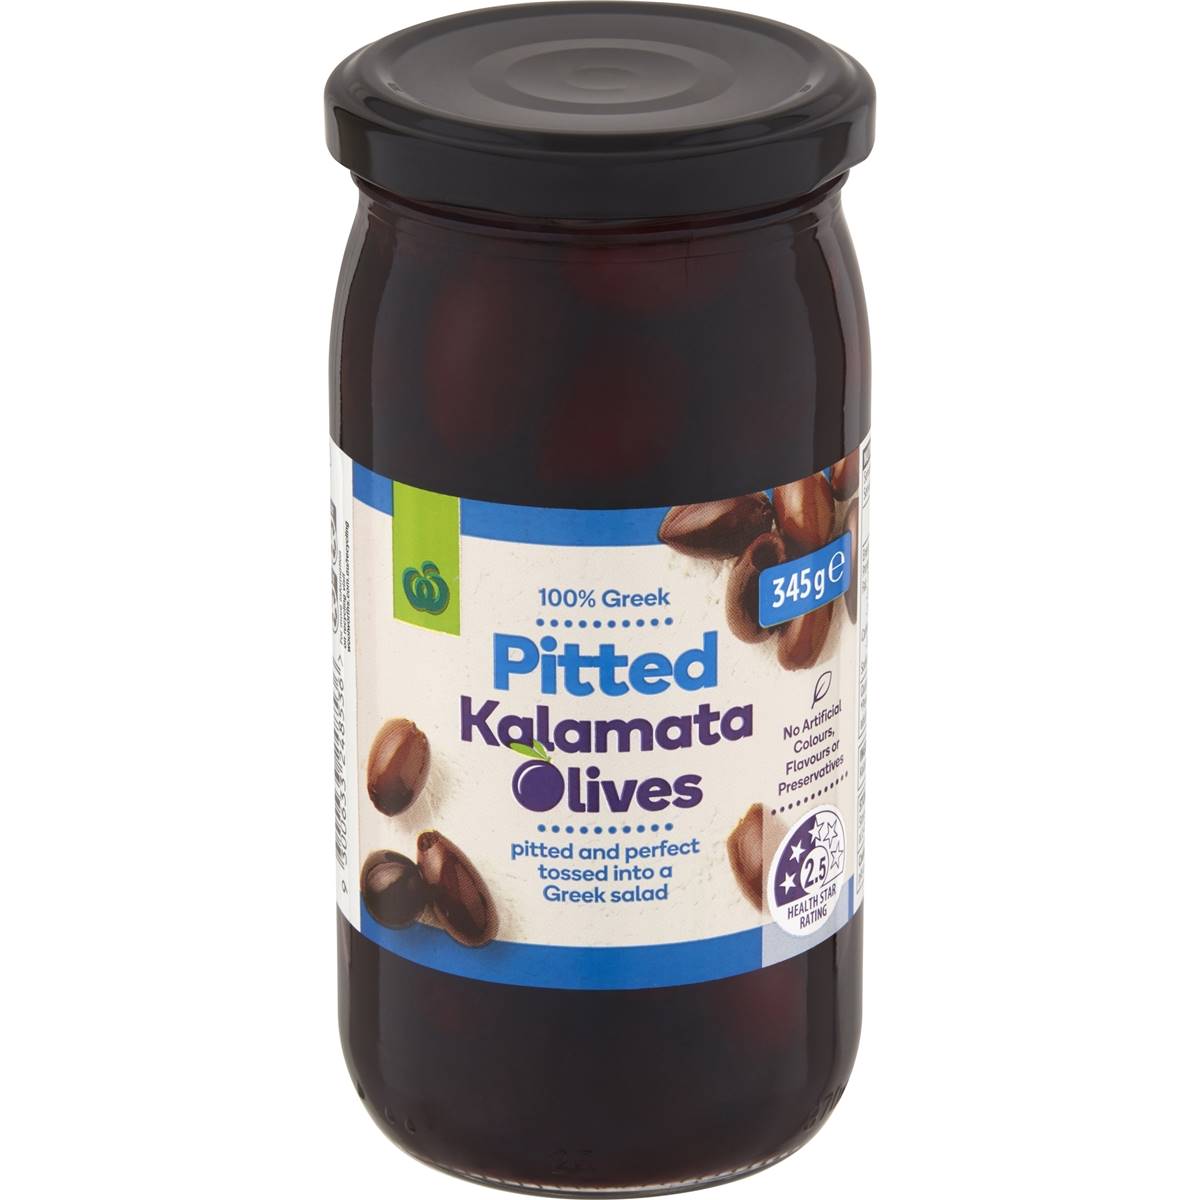 Calories in Woolworths Pitted Kalamata Olives